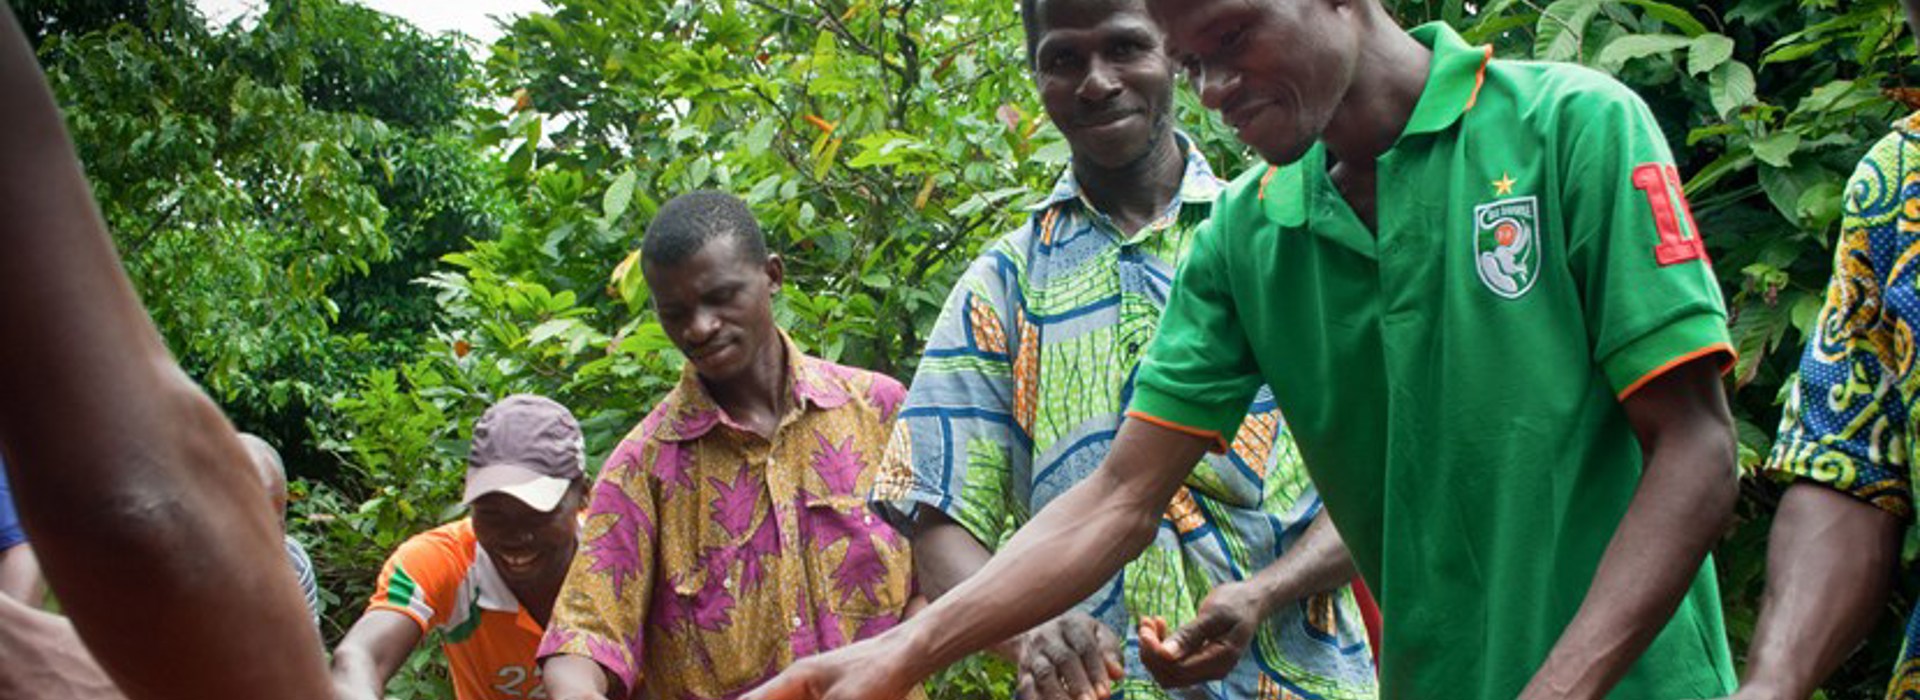 Workers sorting cocoa beans